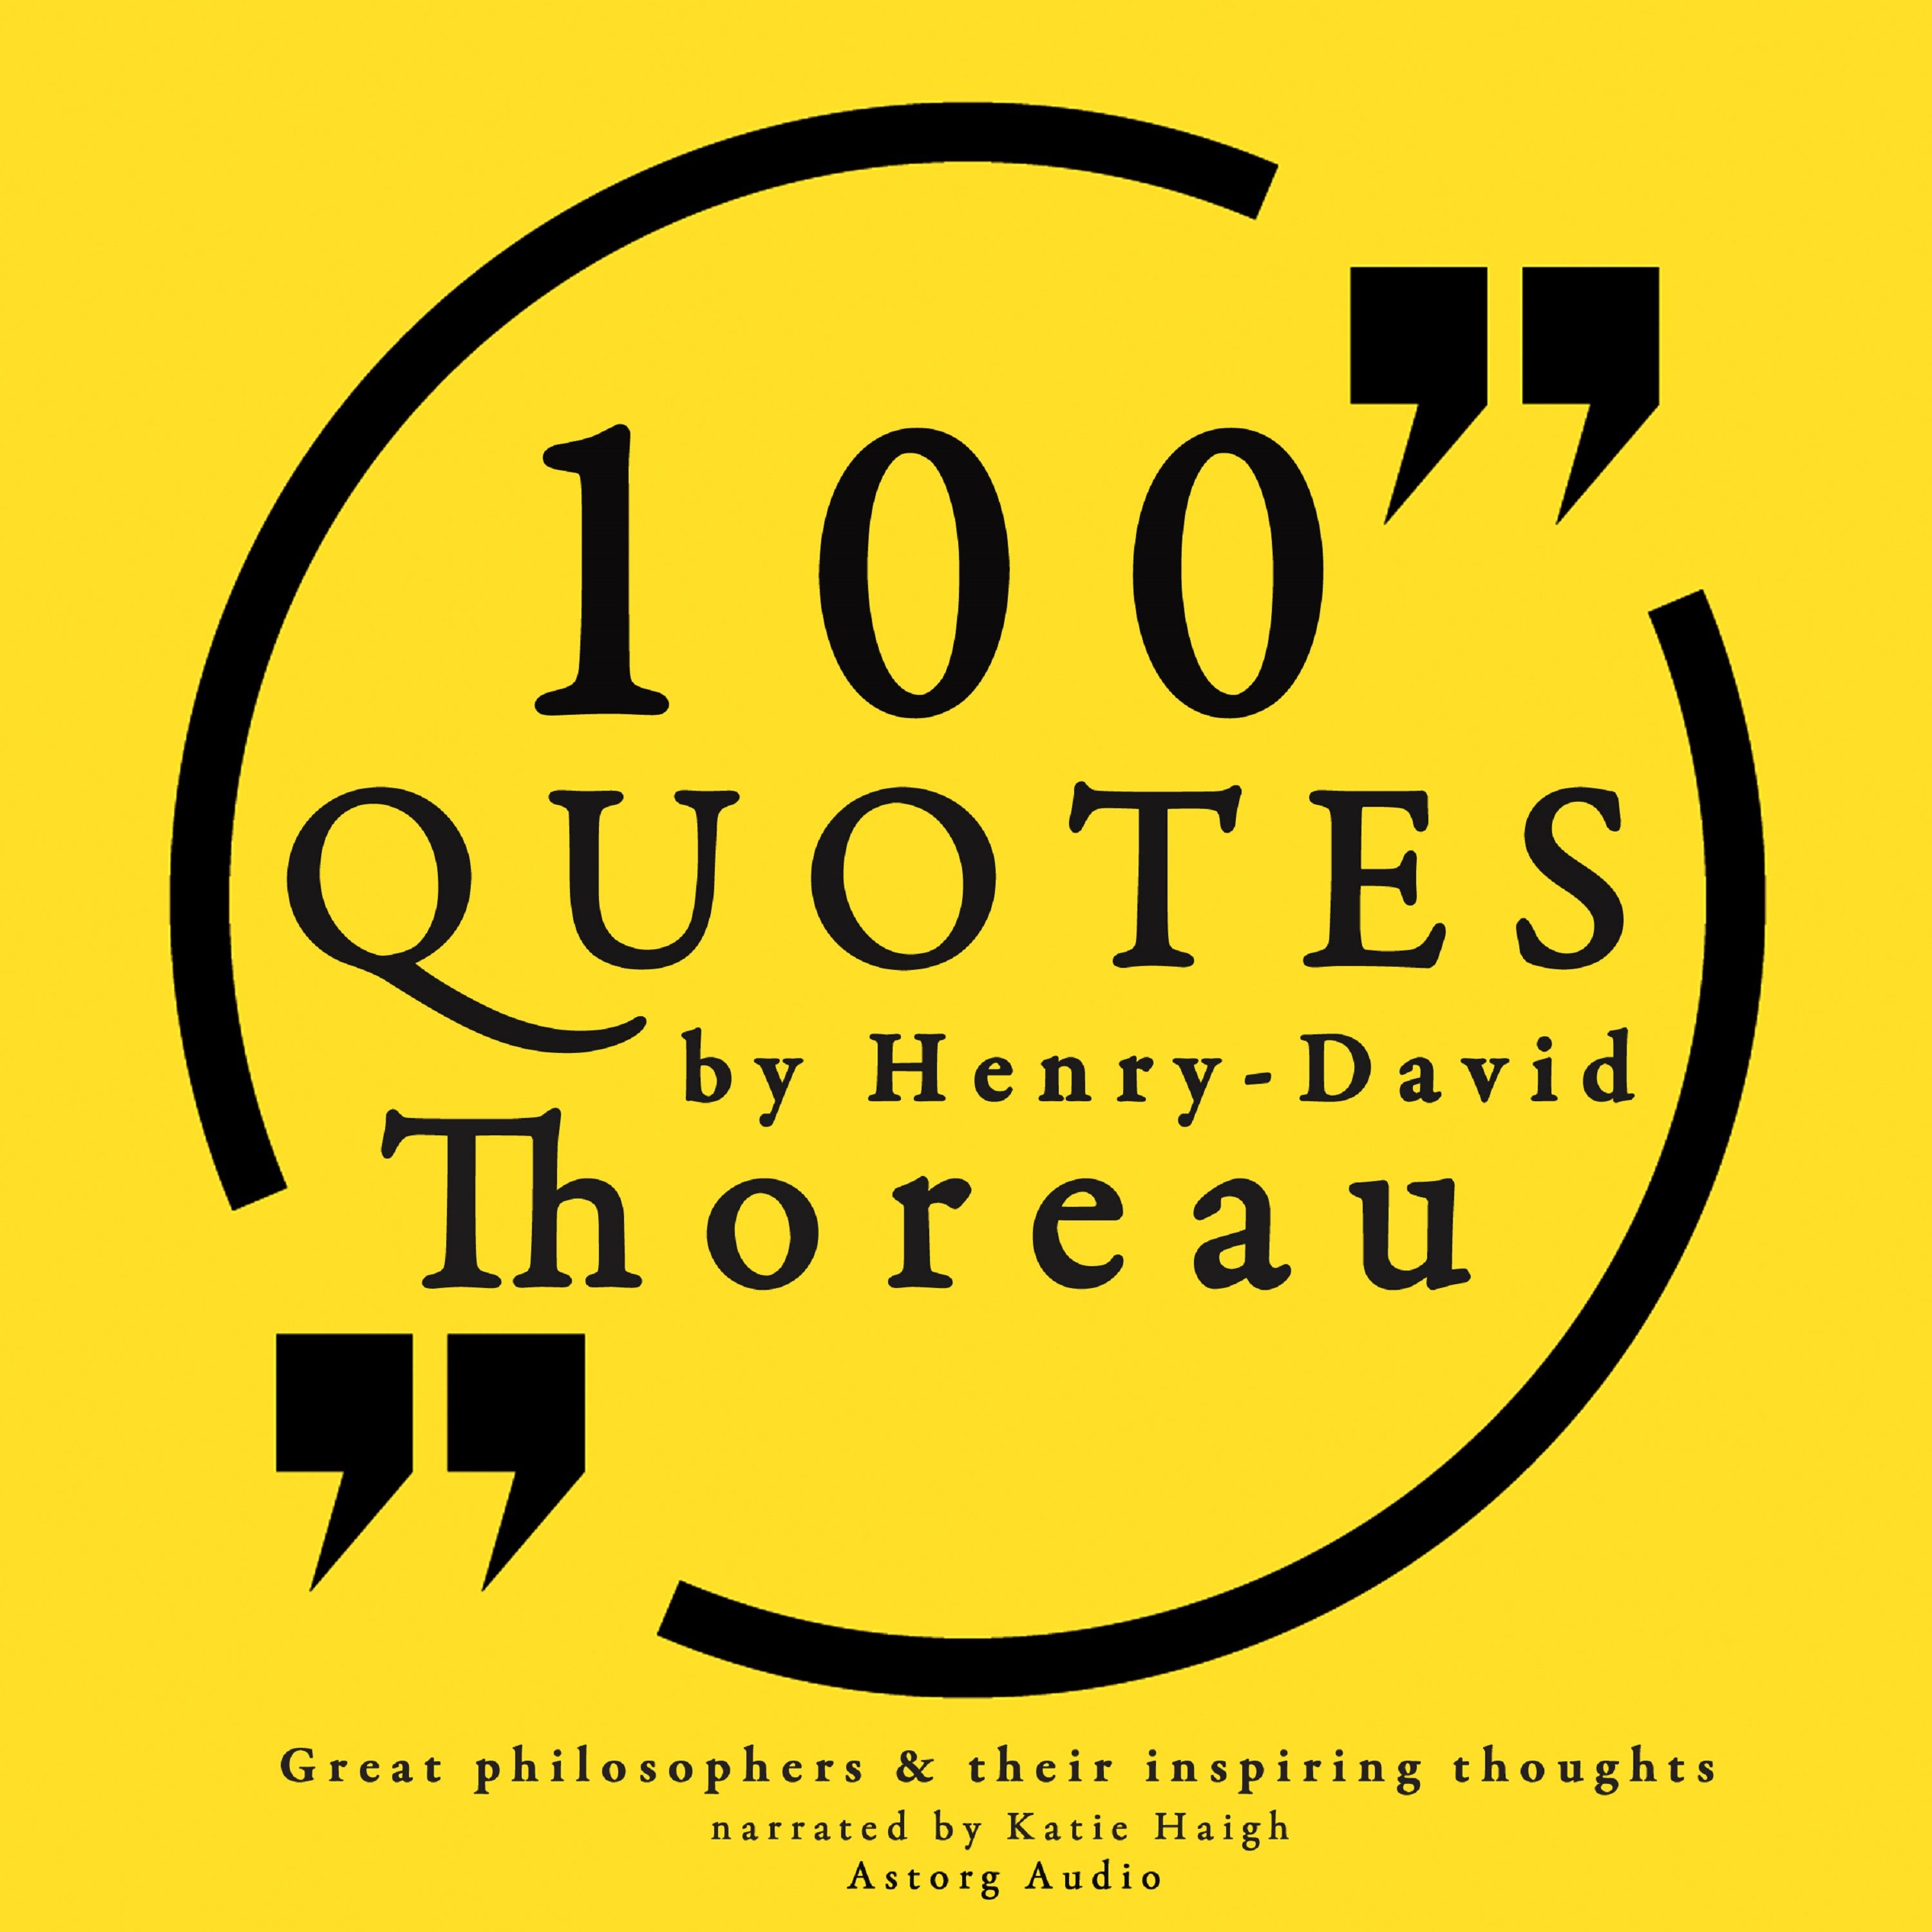 100 Quotes by Henry David Thoreau: Great Philosophers & Their Inspiring Thoughts, lydbog af Henry David Thoreau